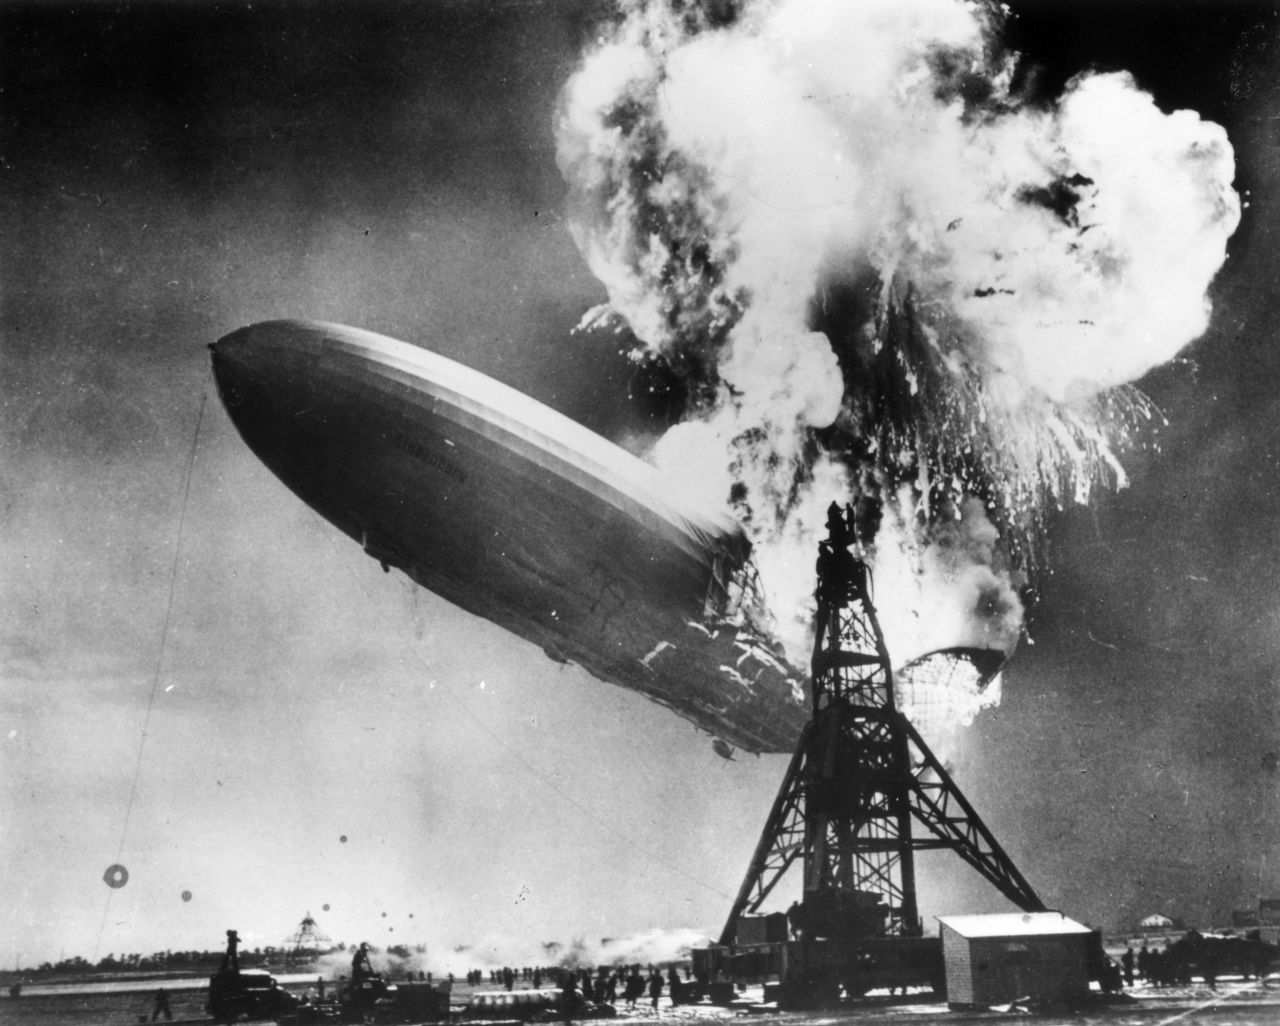 But the Hindenburg disaster at Lakehurst, New Jersey, in 1937, put paid to the era of passenger-carrying airships.